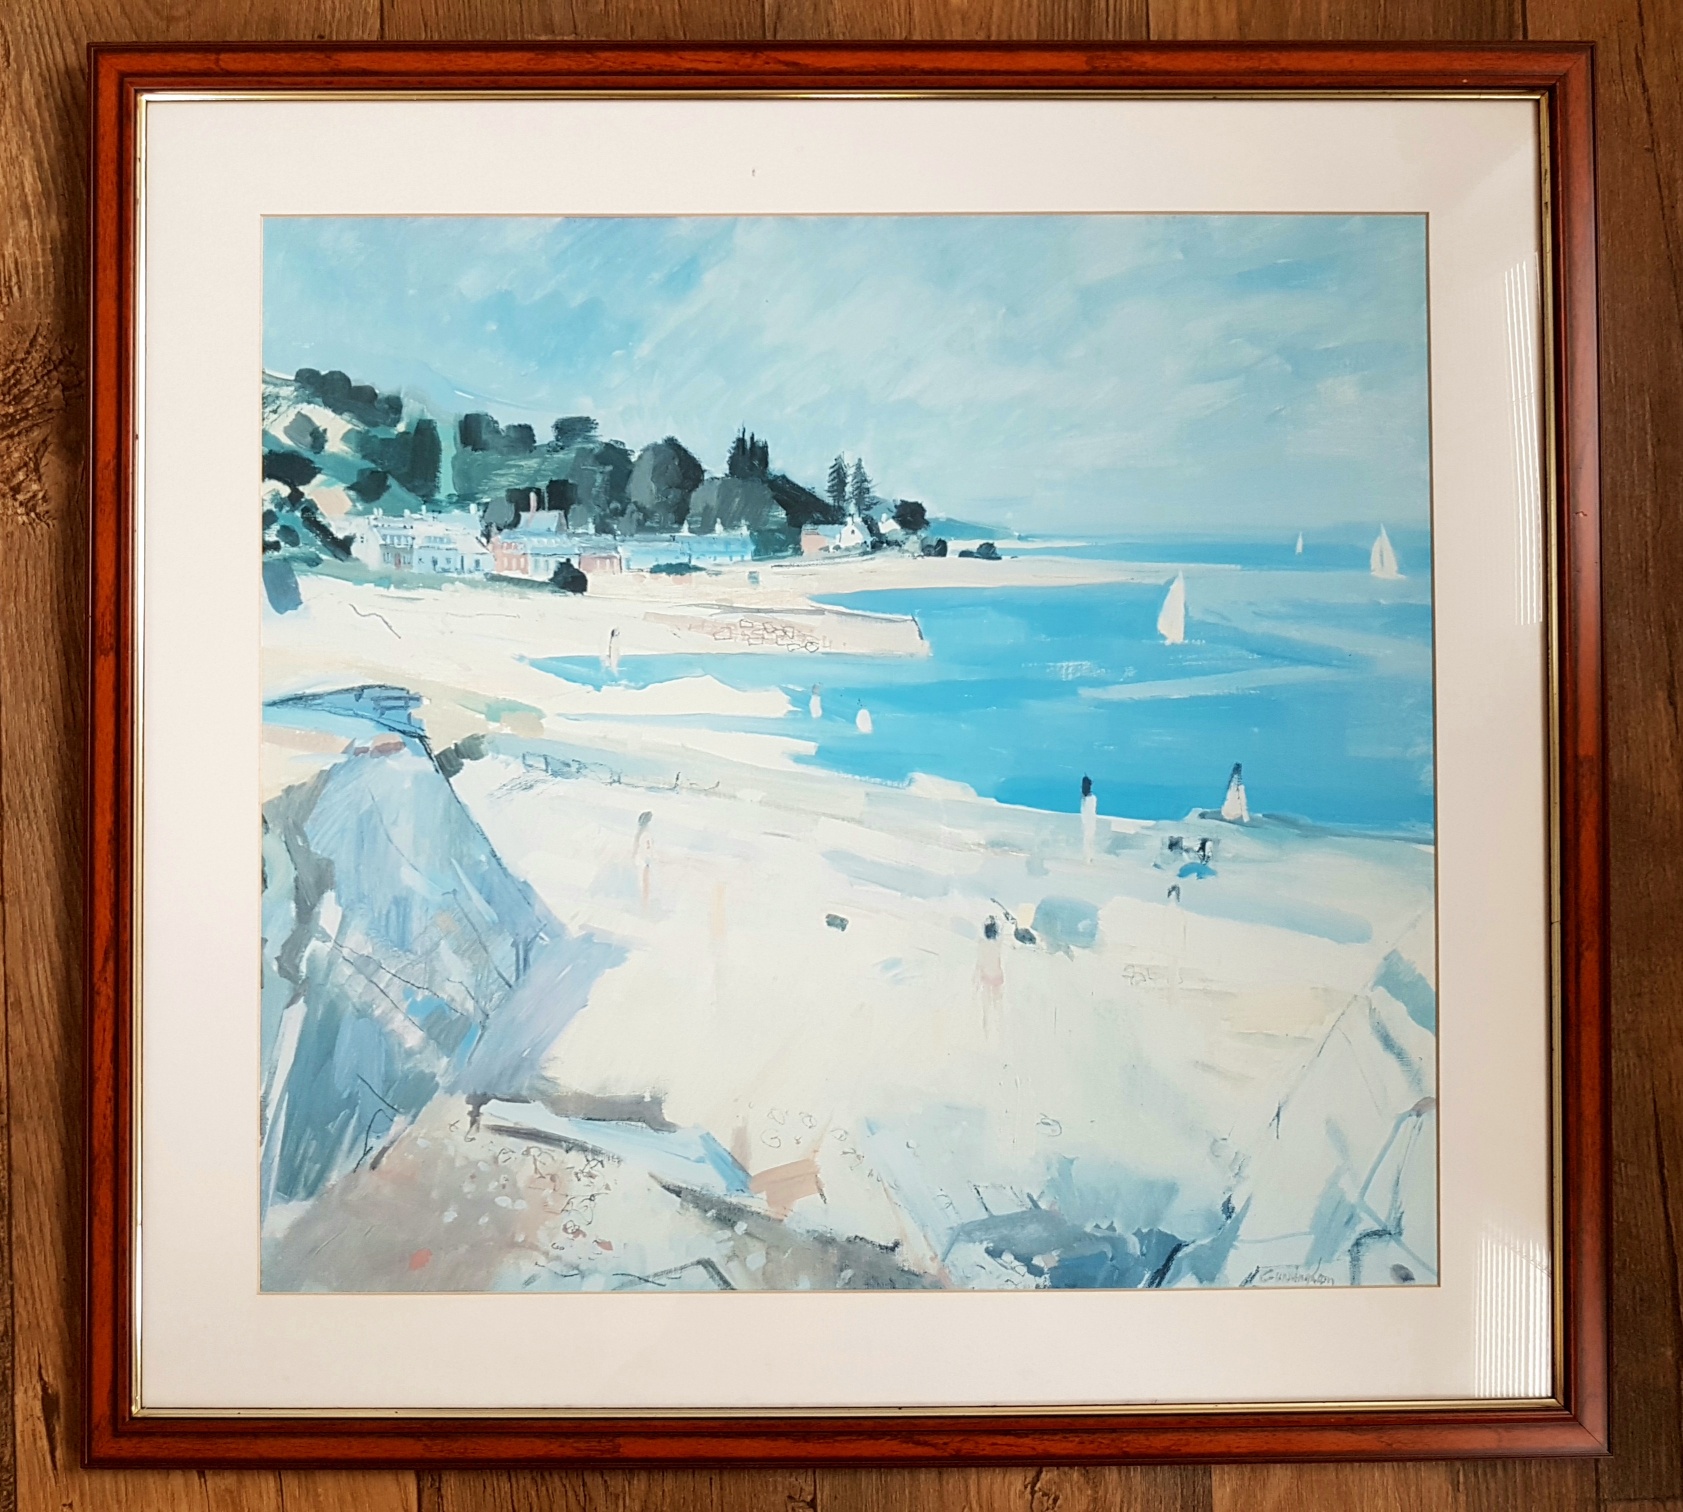 Three Framed and Glazed Decorative Prints of coastal scenes, all measuring 28 inches x 30 inches - Image 3 of 3